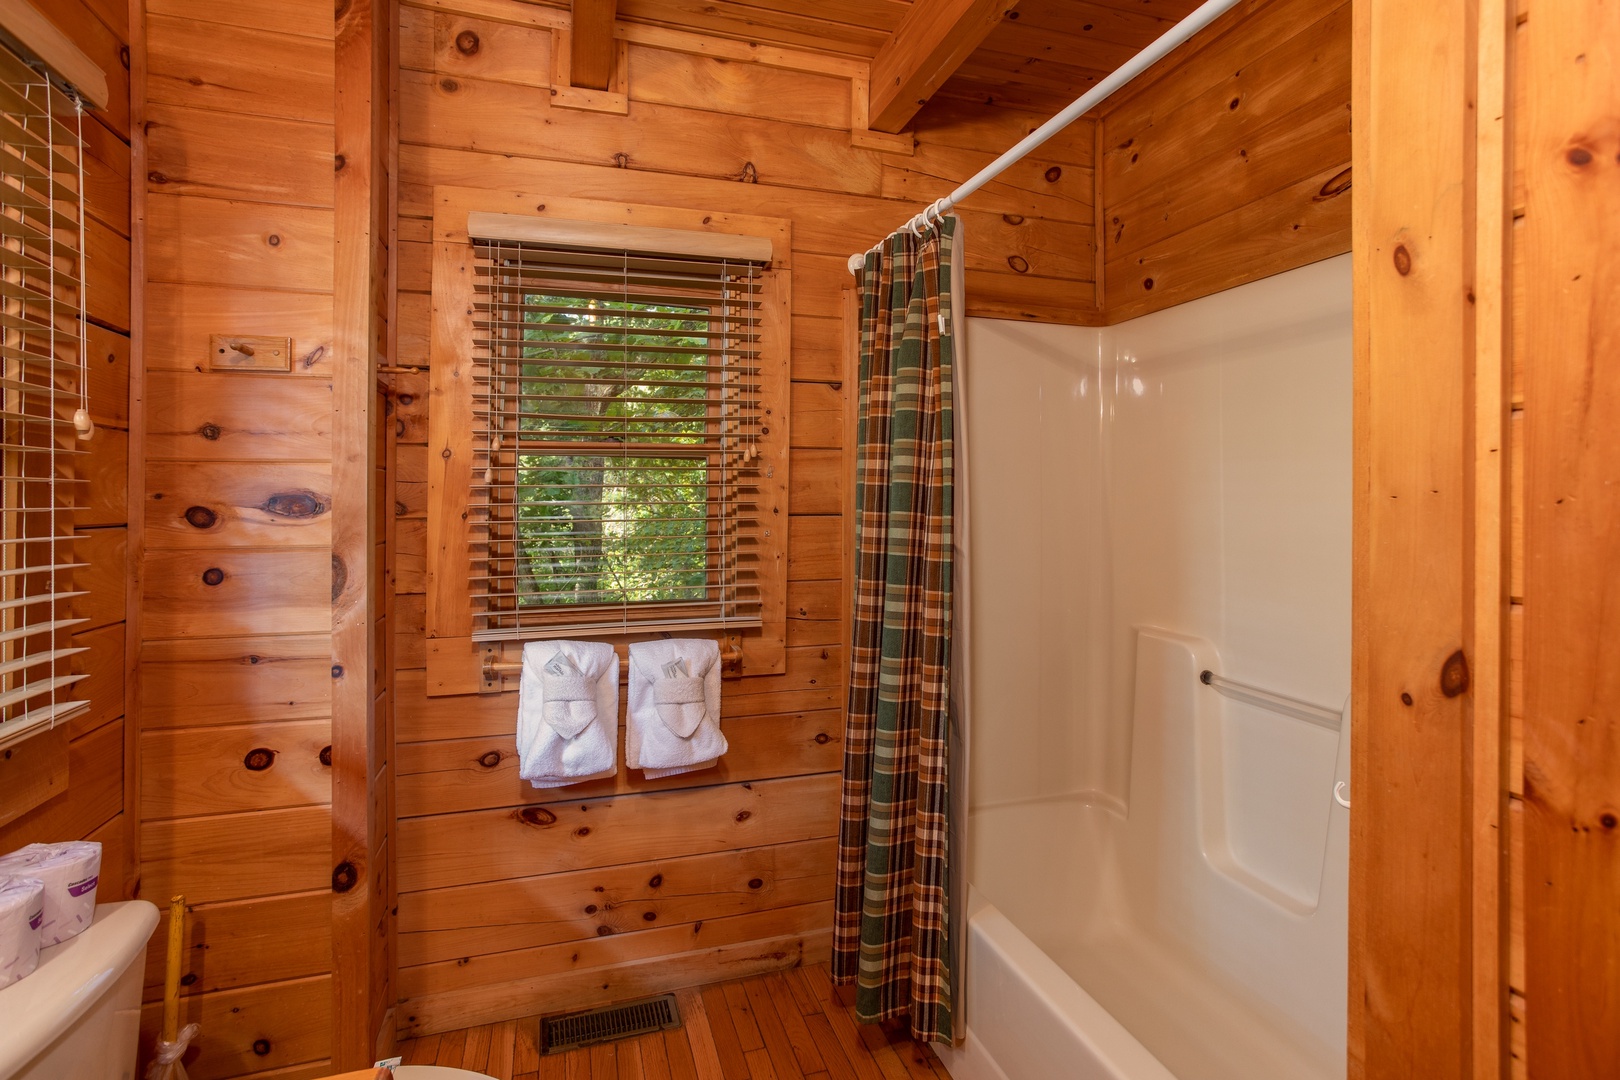 Bathroom with a tub and shower at Dreams Do Come True, a 1-bedroom cabin rental located in Pigeon Forge